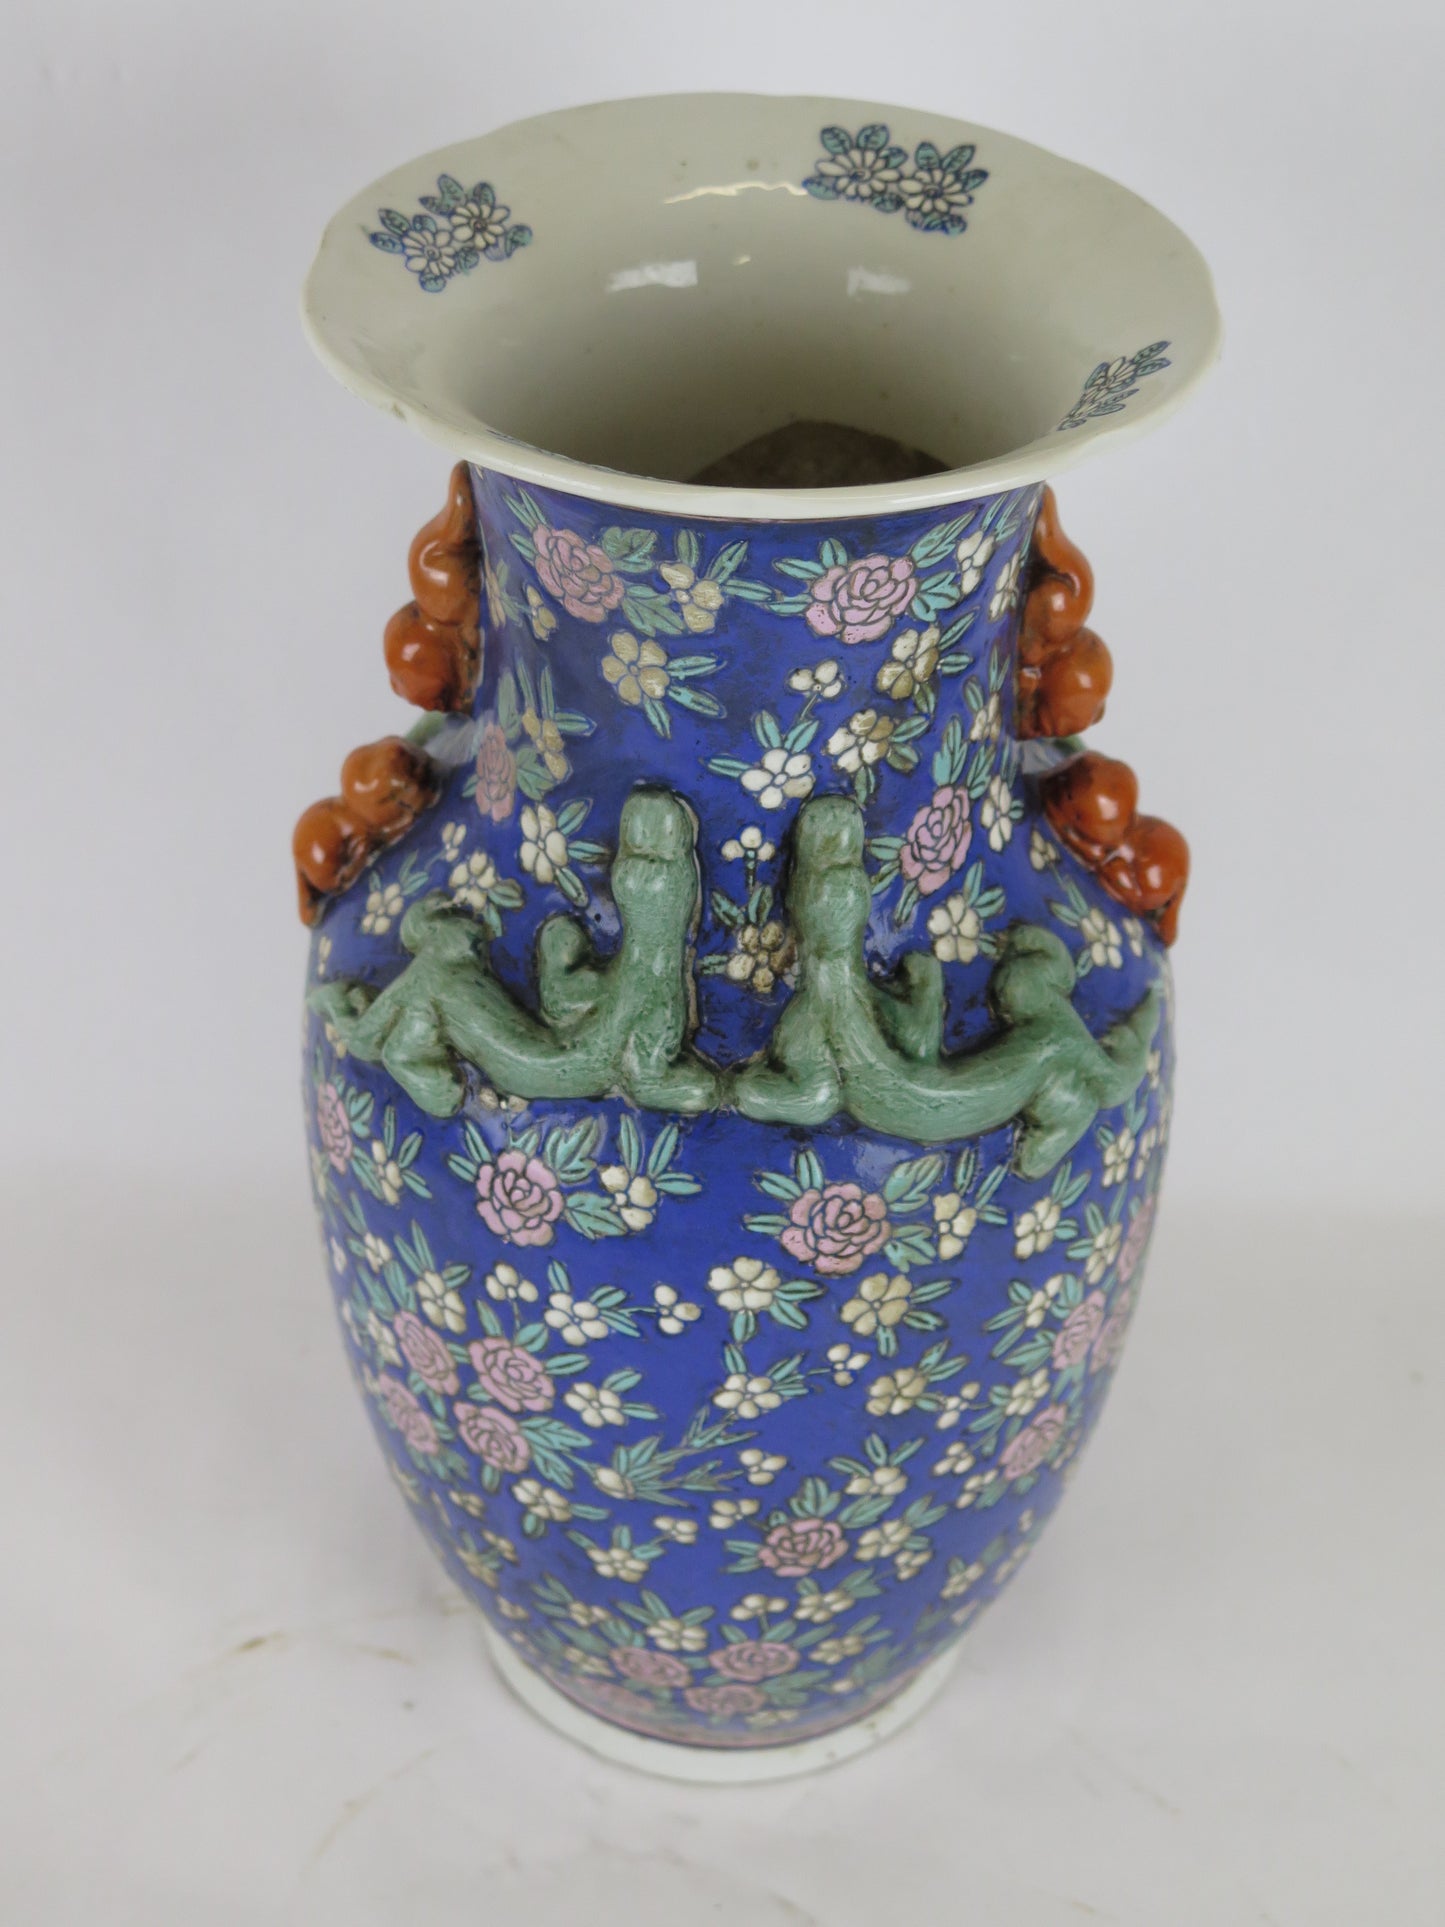 Hand-painted ceramic vase China 1900s Asia Chinese vintage floral art CM3